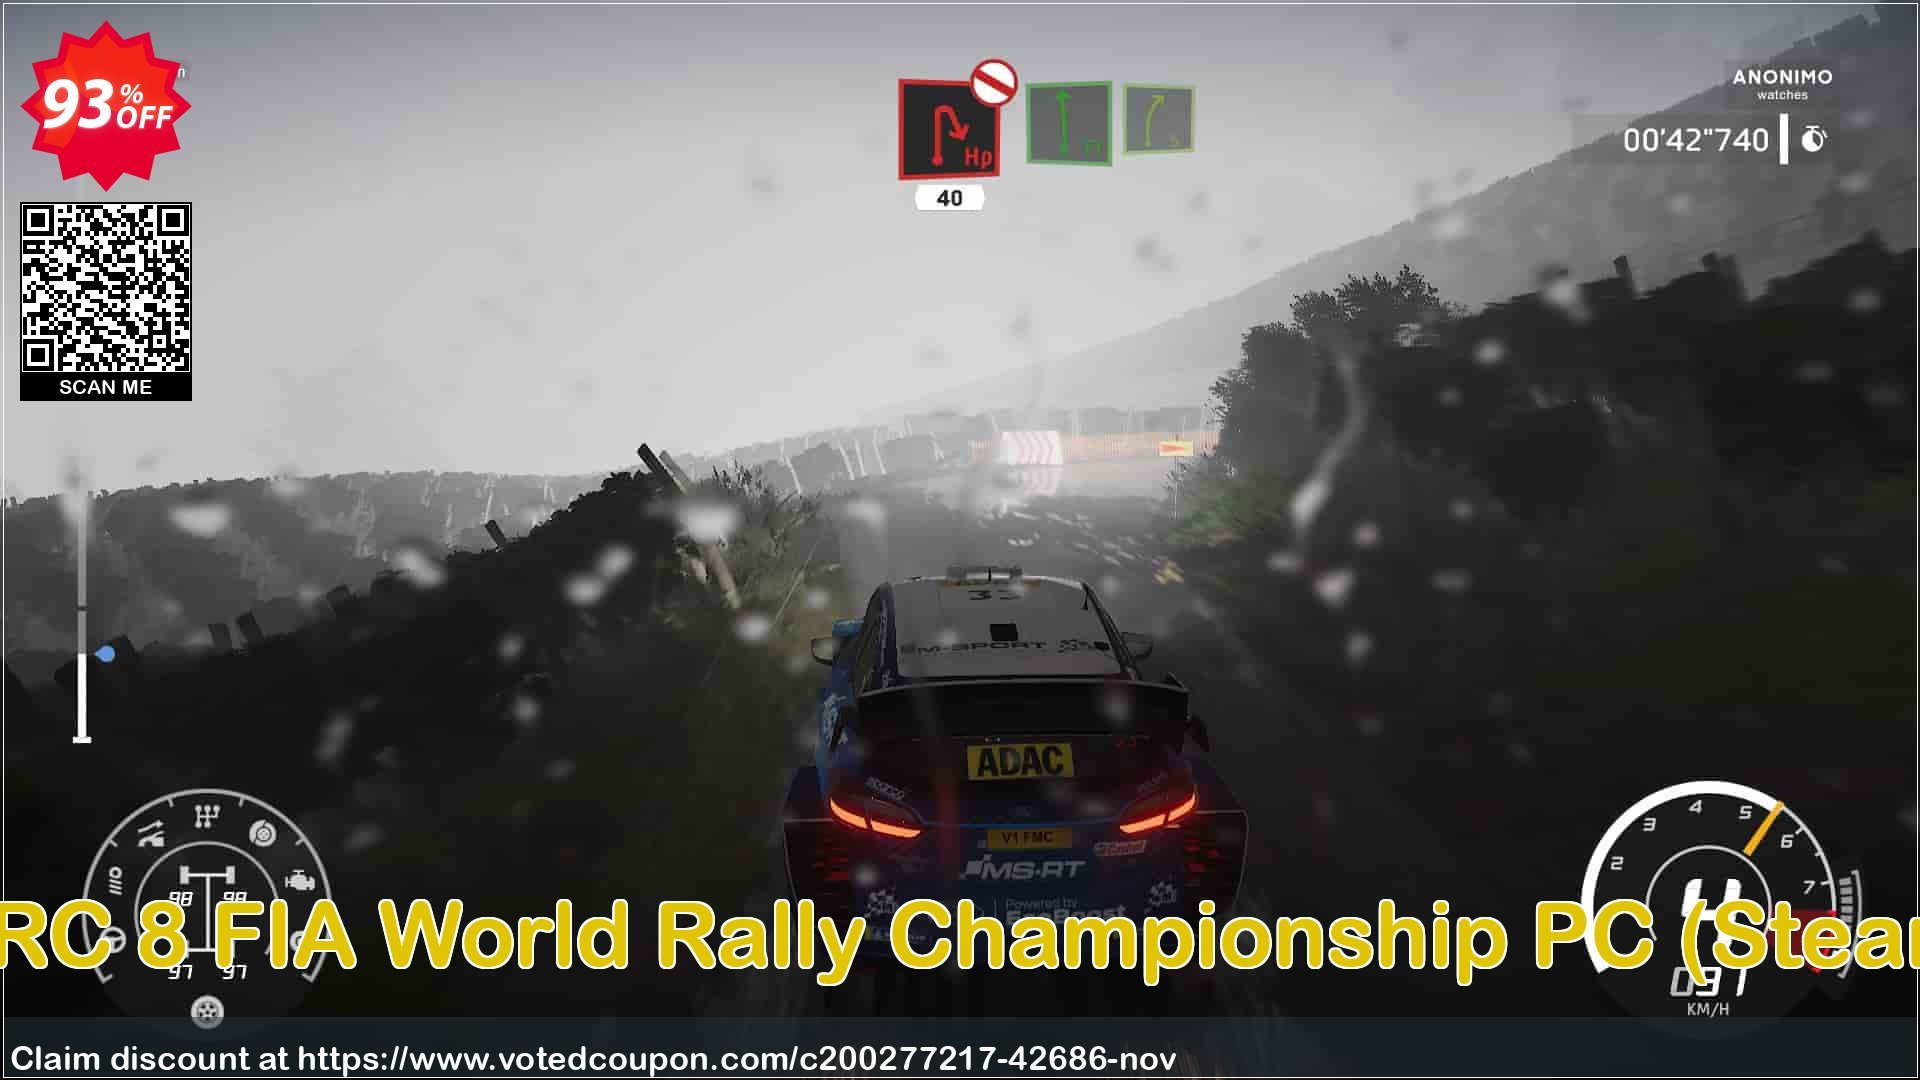 WRC 8 FIA World Rally Championship PC, Steam  Coupon Code May 2024, 93% OFF - VotedCoupon